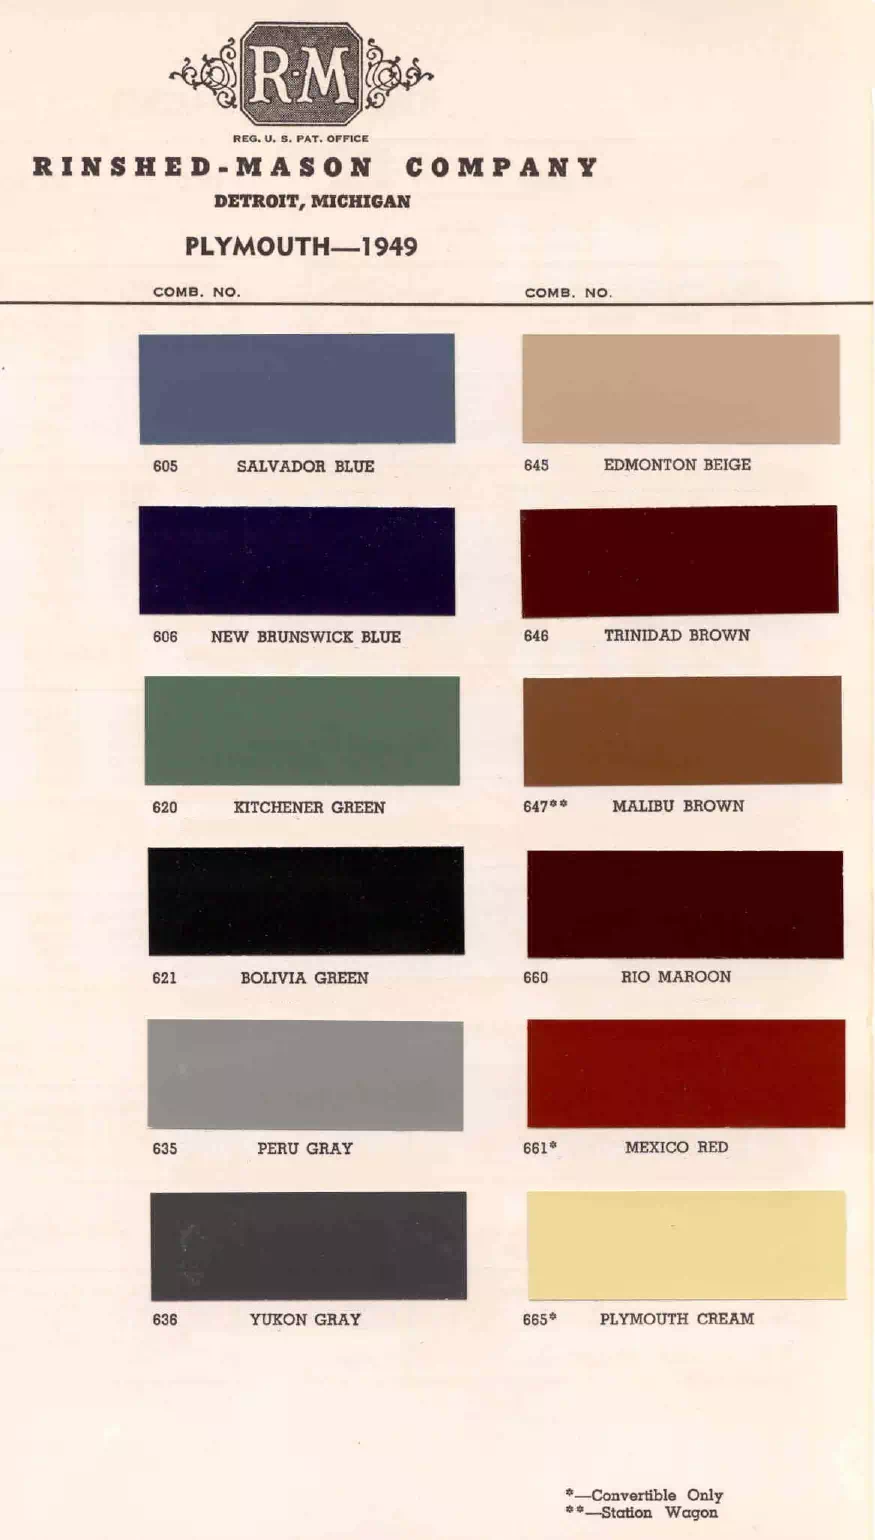 Paint codes, and their ordering stock numbers for their color on 1949 vehicles